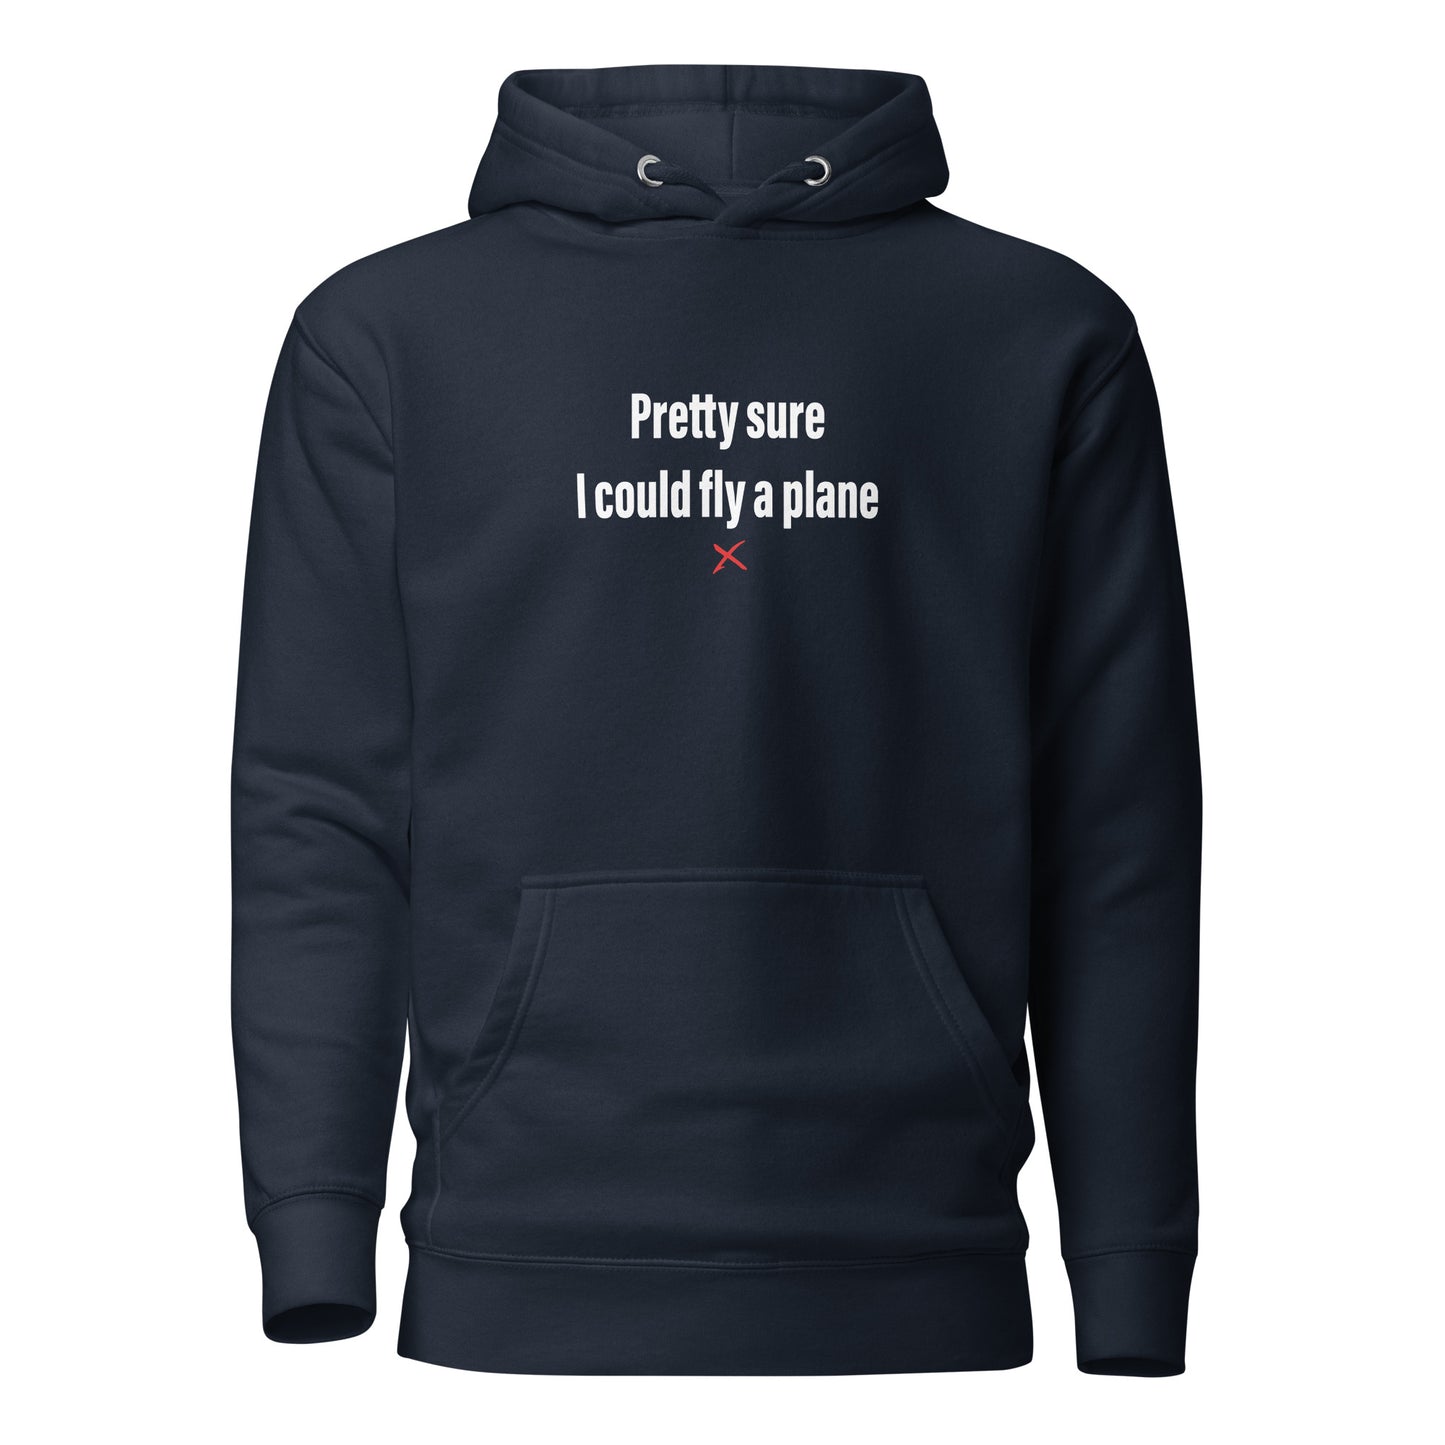 Pretty sure I could fly a plane - Hoodie